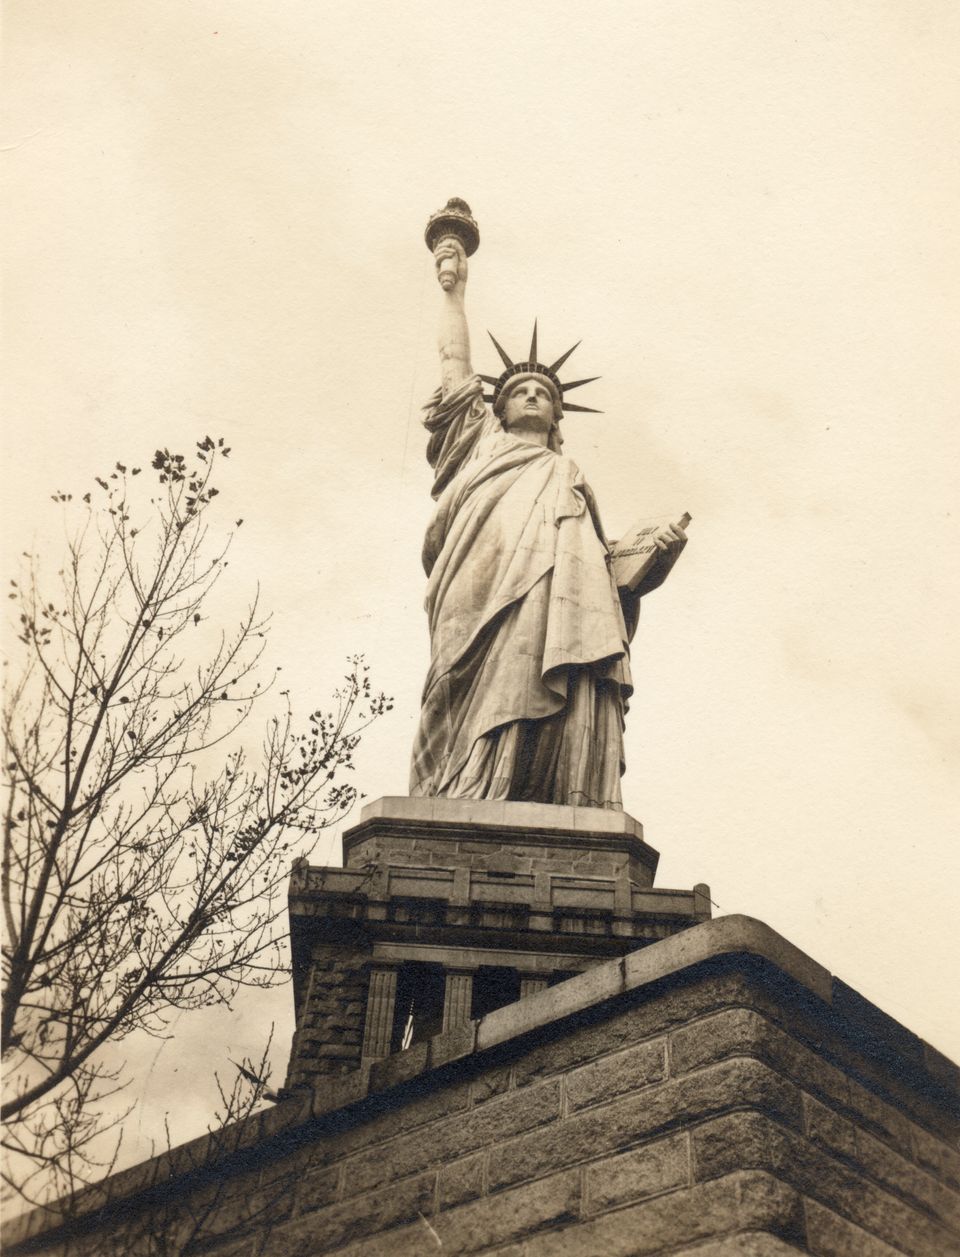 The Statue Of Liberty